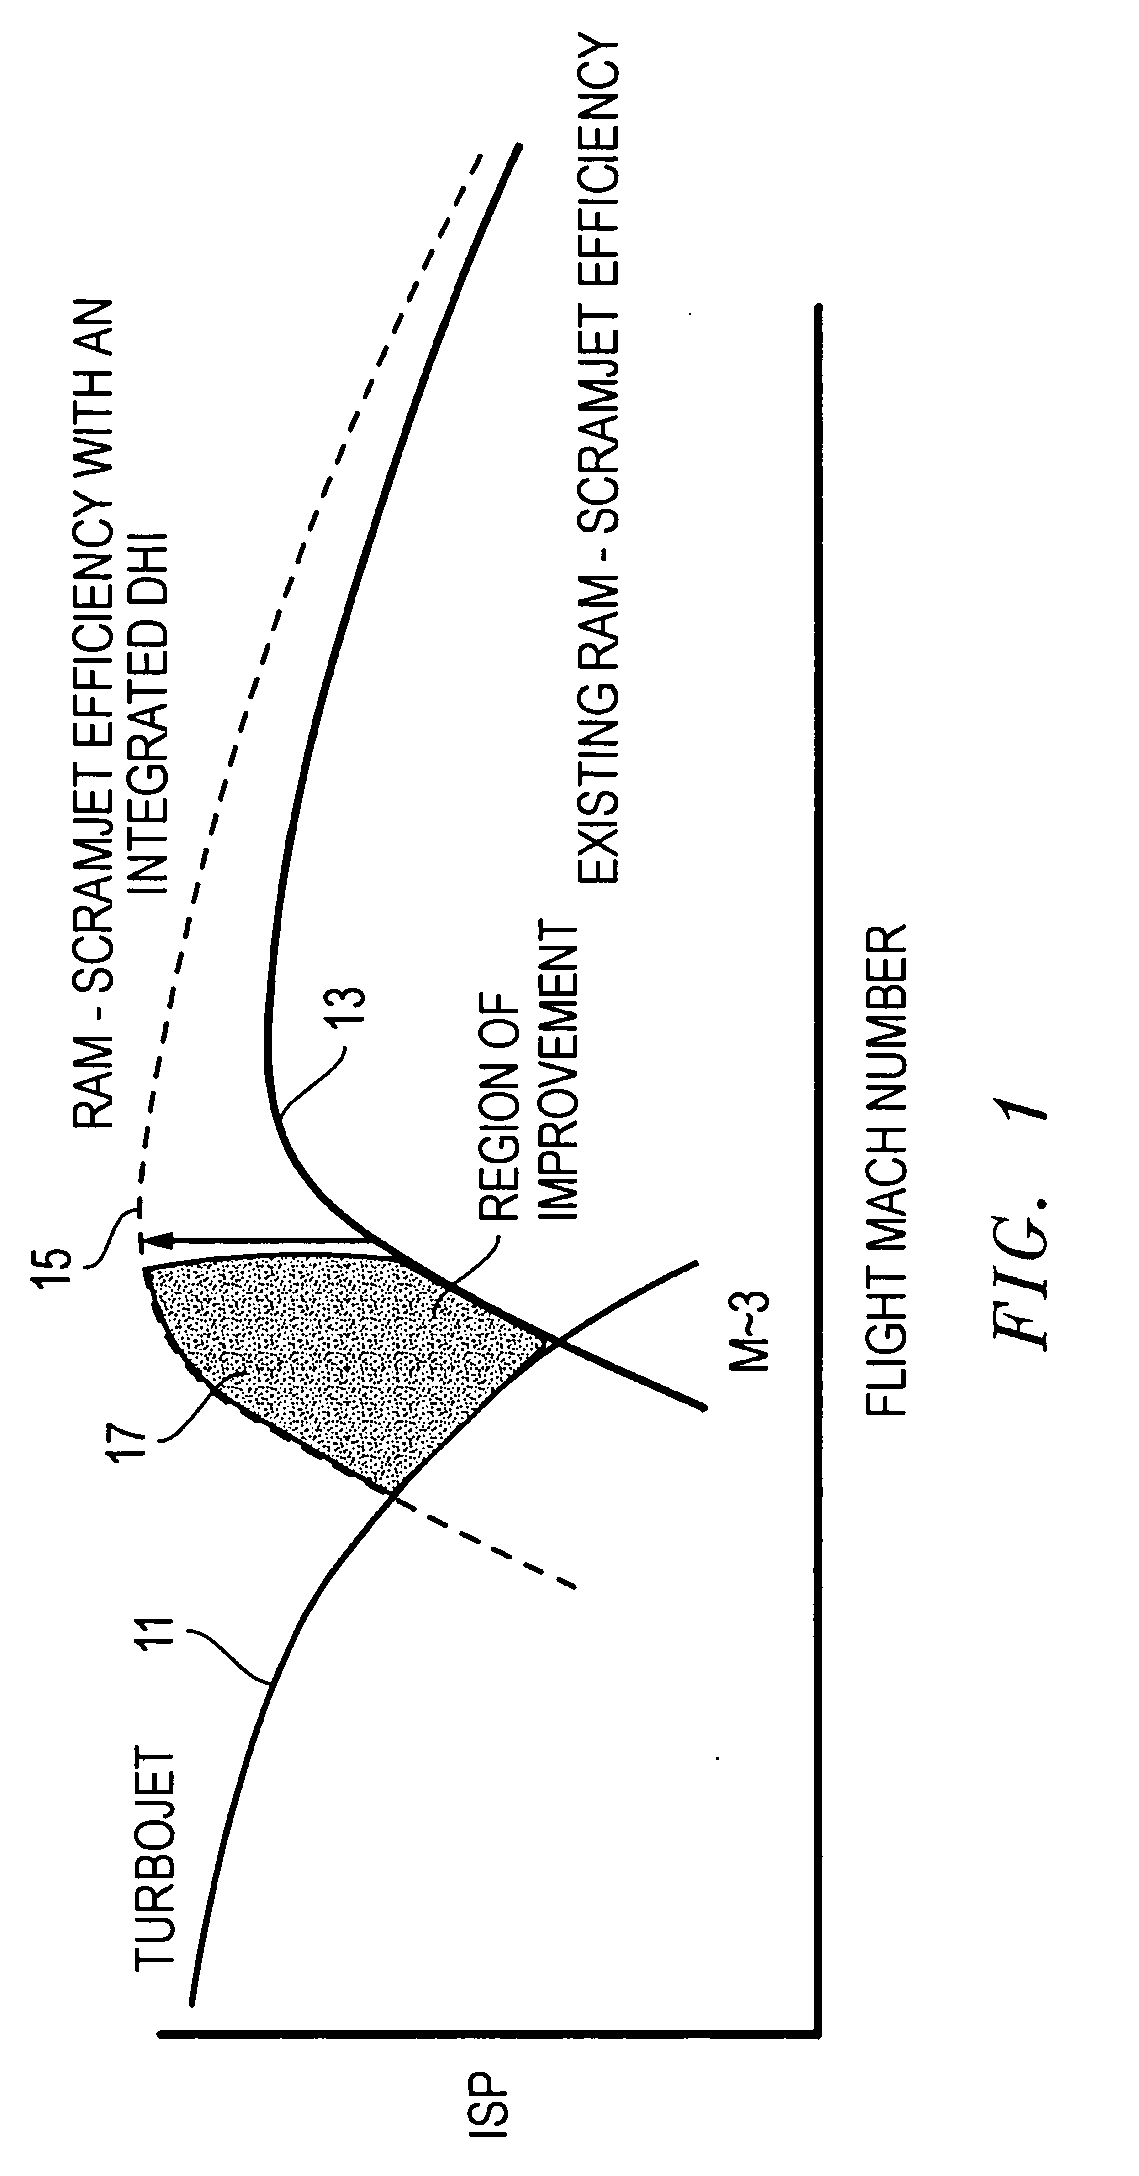 System, method, and apparatus for diverterless hypersonic inlet for integrated turbojet and ram-scramjet applications